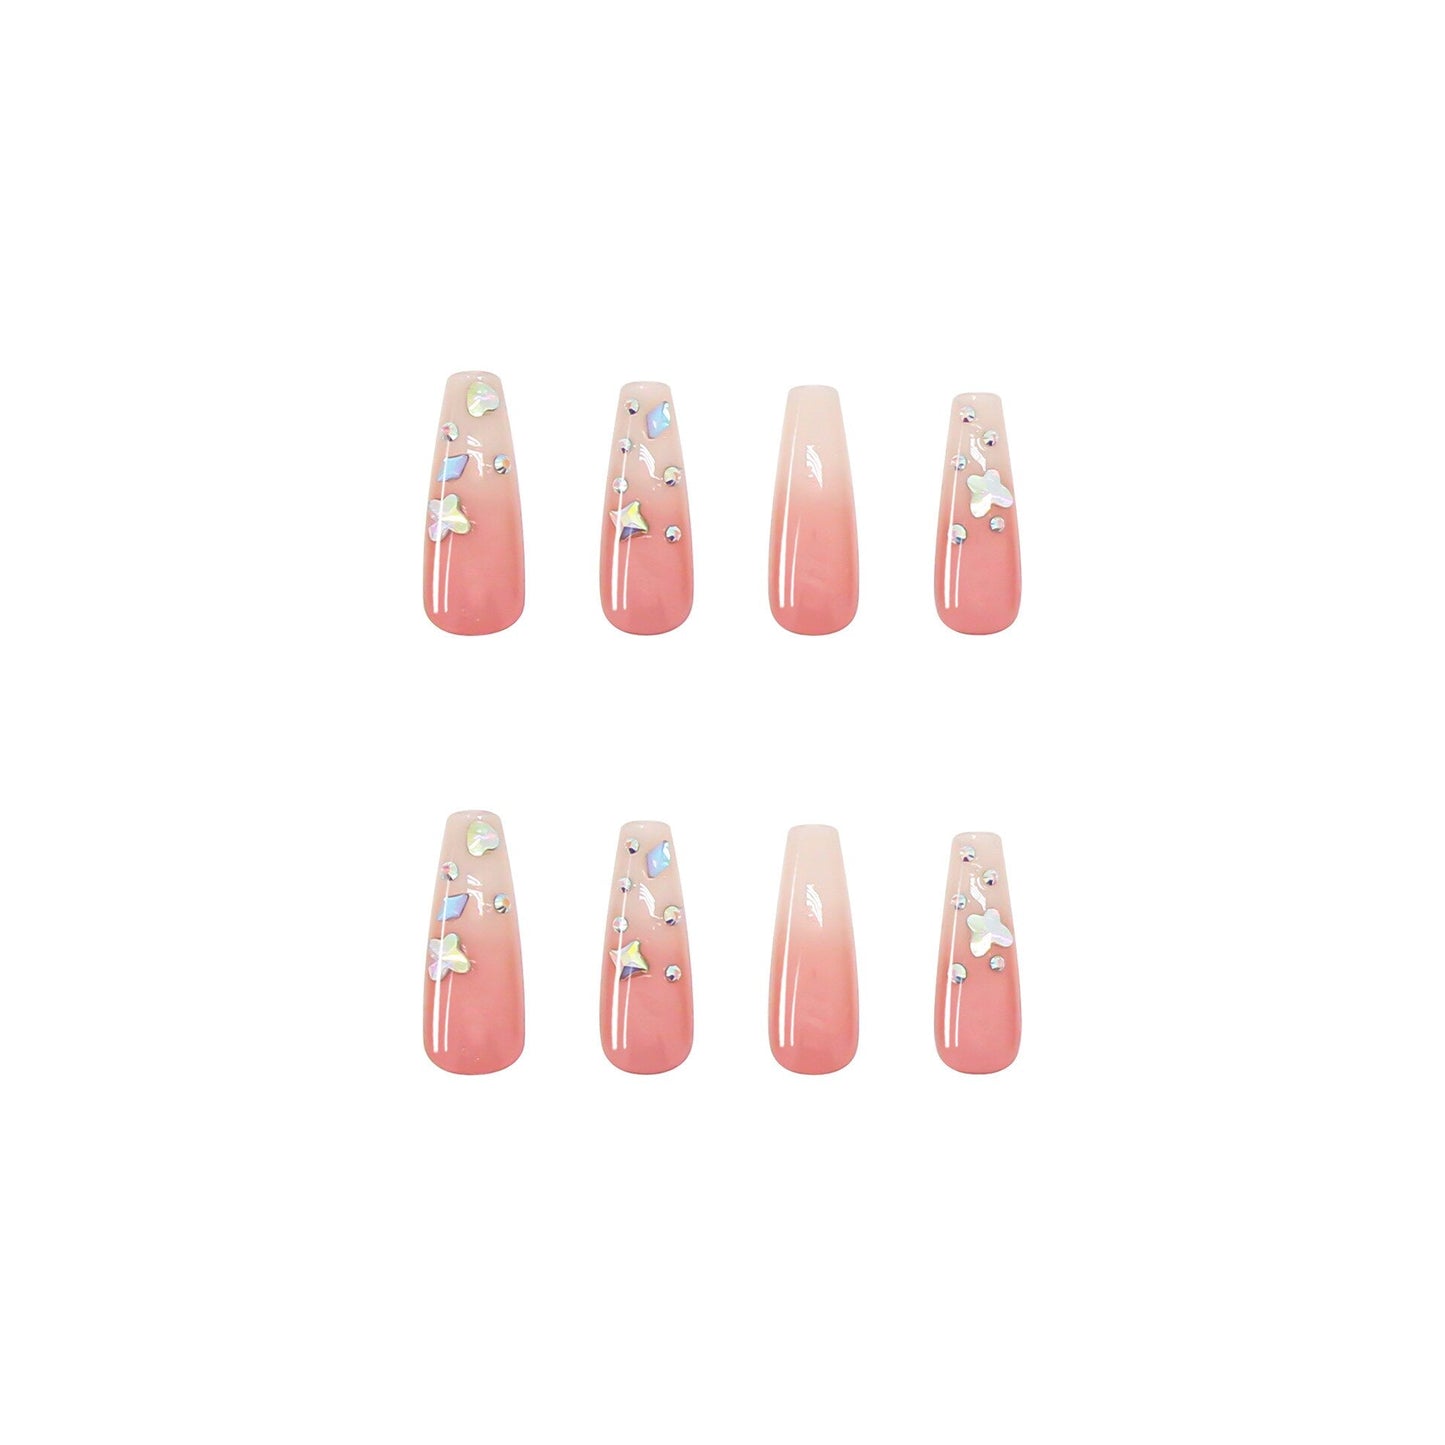 3D fake nails set glossy pink long french coffin tips with glitter star diamond faux ongles press on acrylic false nail supplies